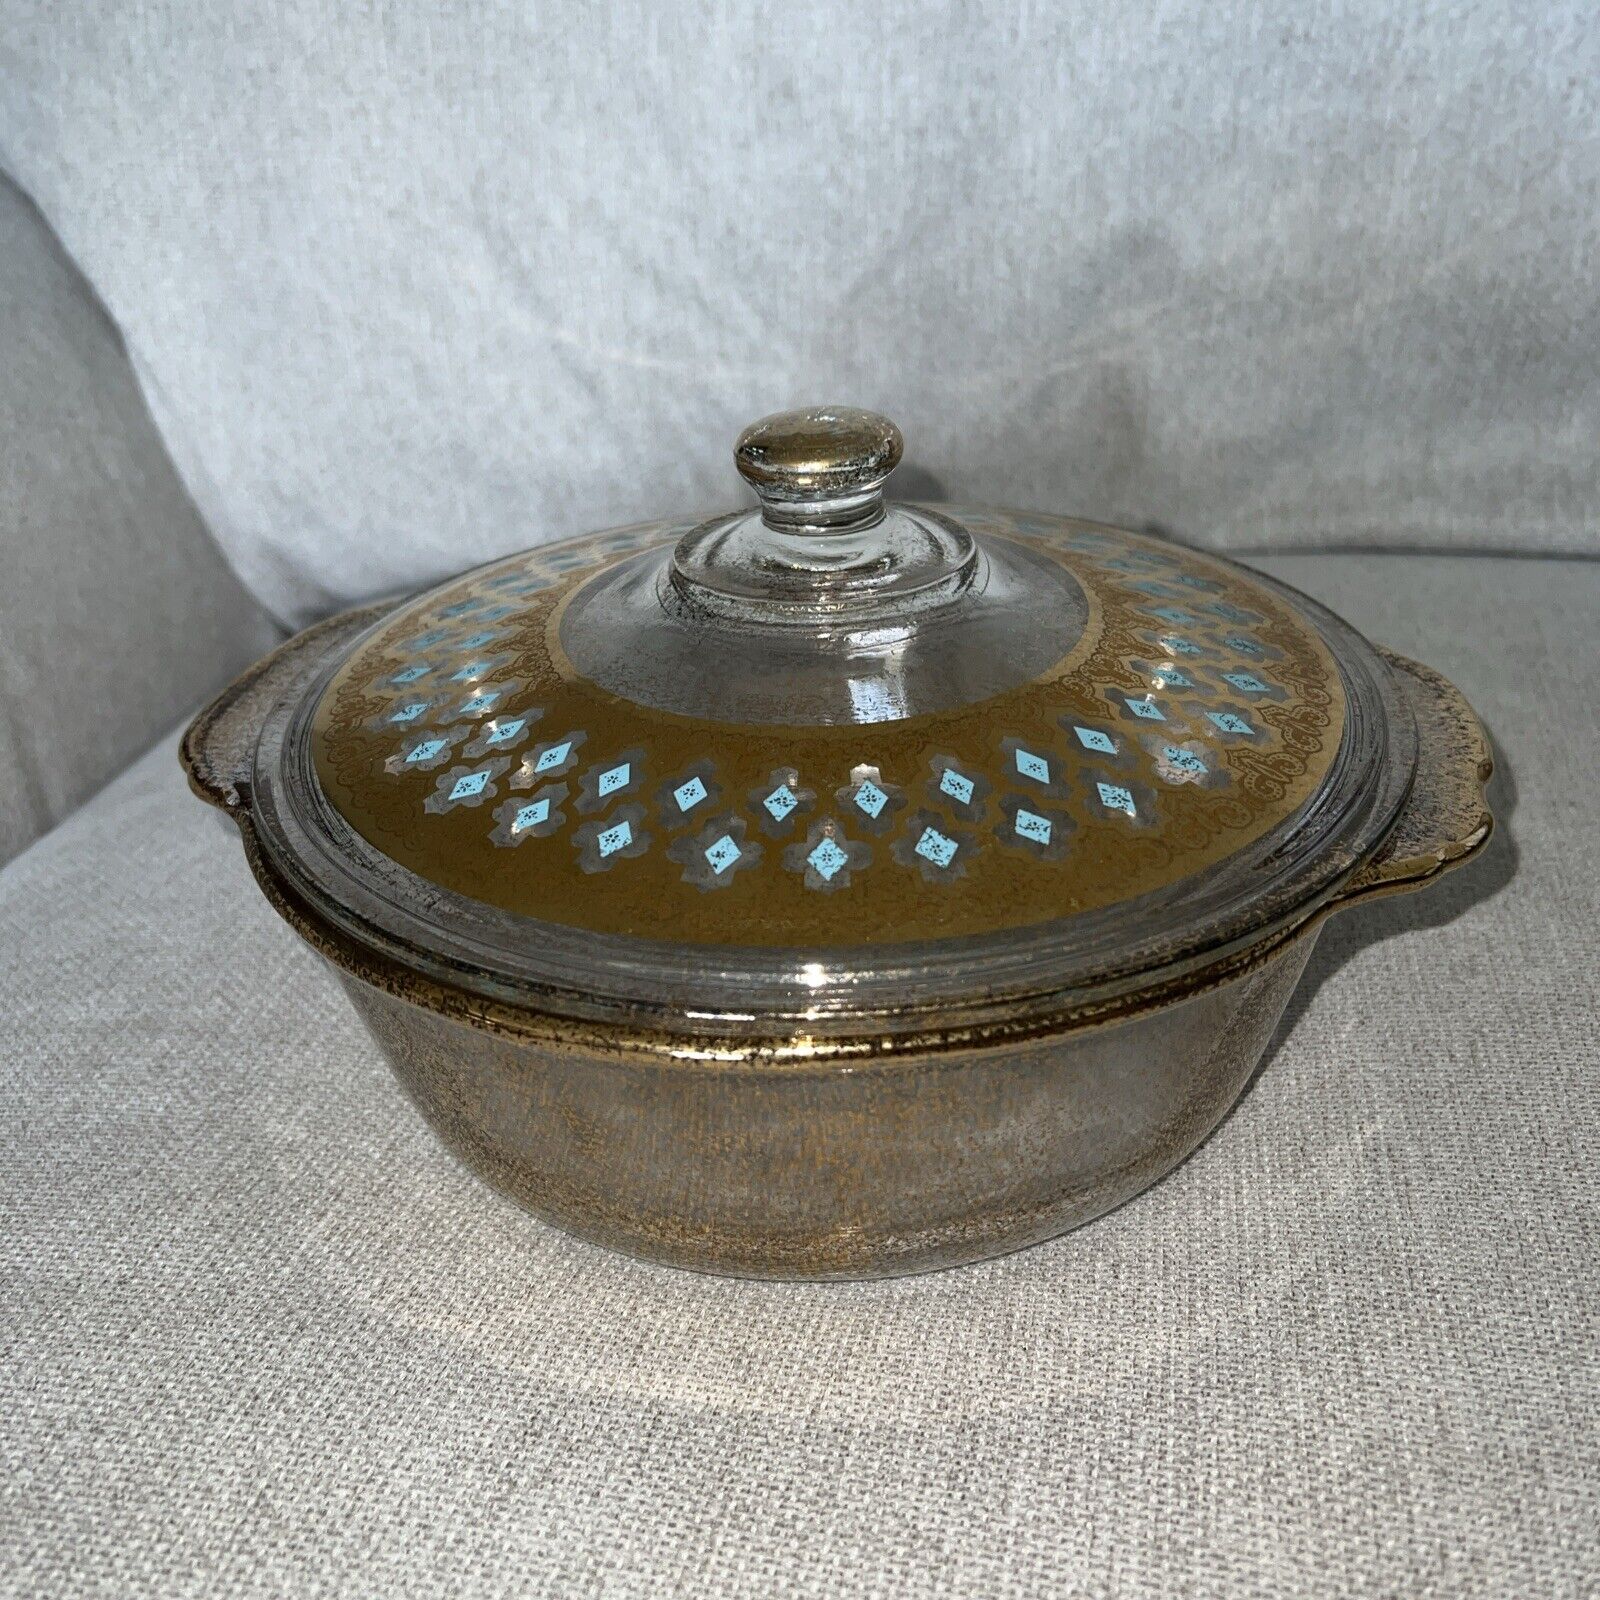 VINTAGE MID CENTURY 2QT FIRE KING GOLD TURQUOISE SPECKLED COVERED CASSEROLE DISH